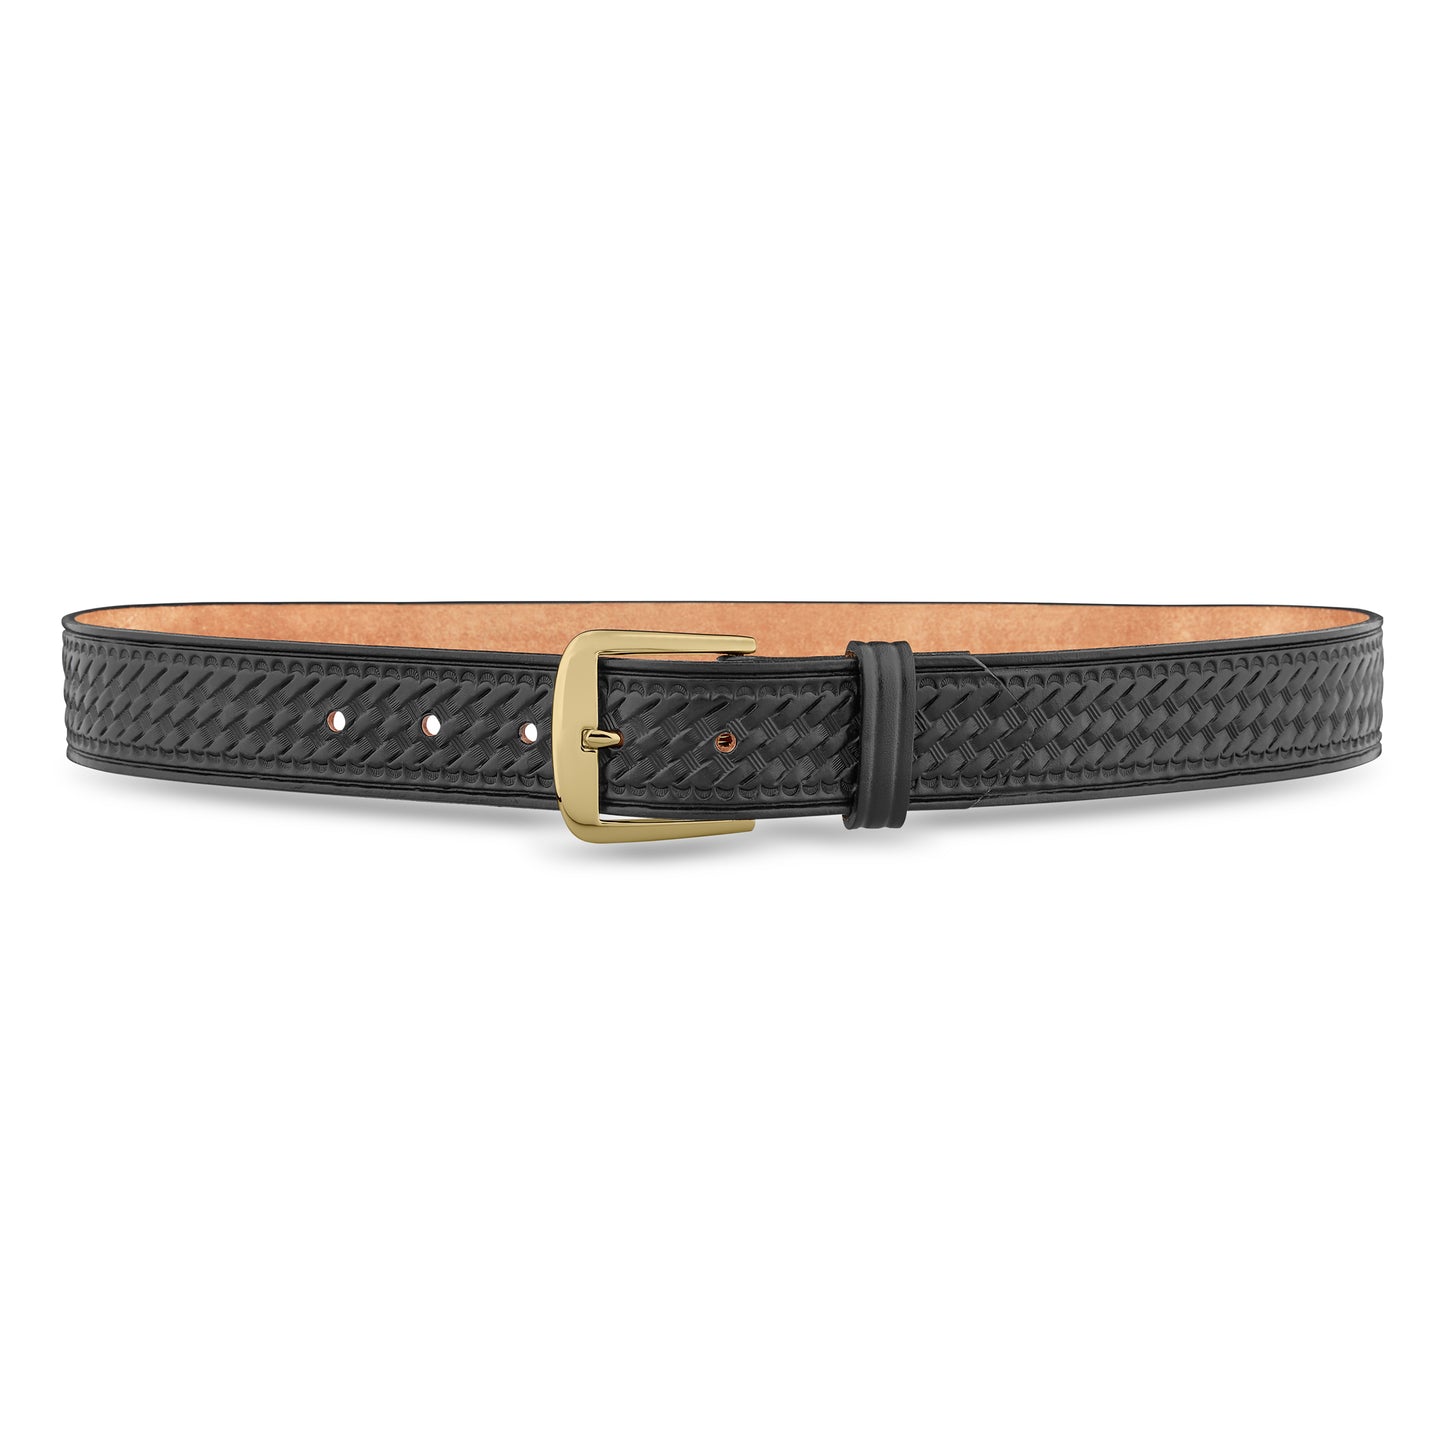 1-1/2" Basketweave Leather Thick Garrison Belt - Black with Gold Buckle made by Dutyman